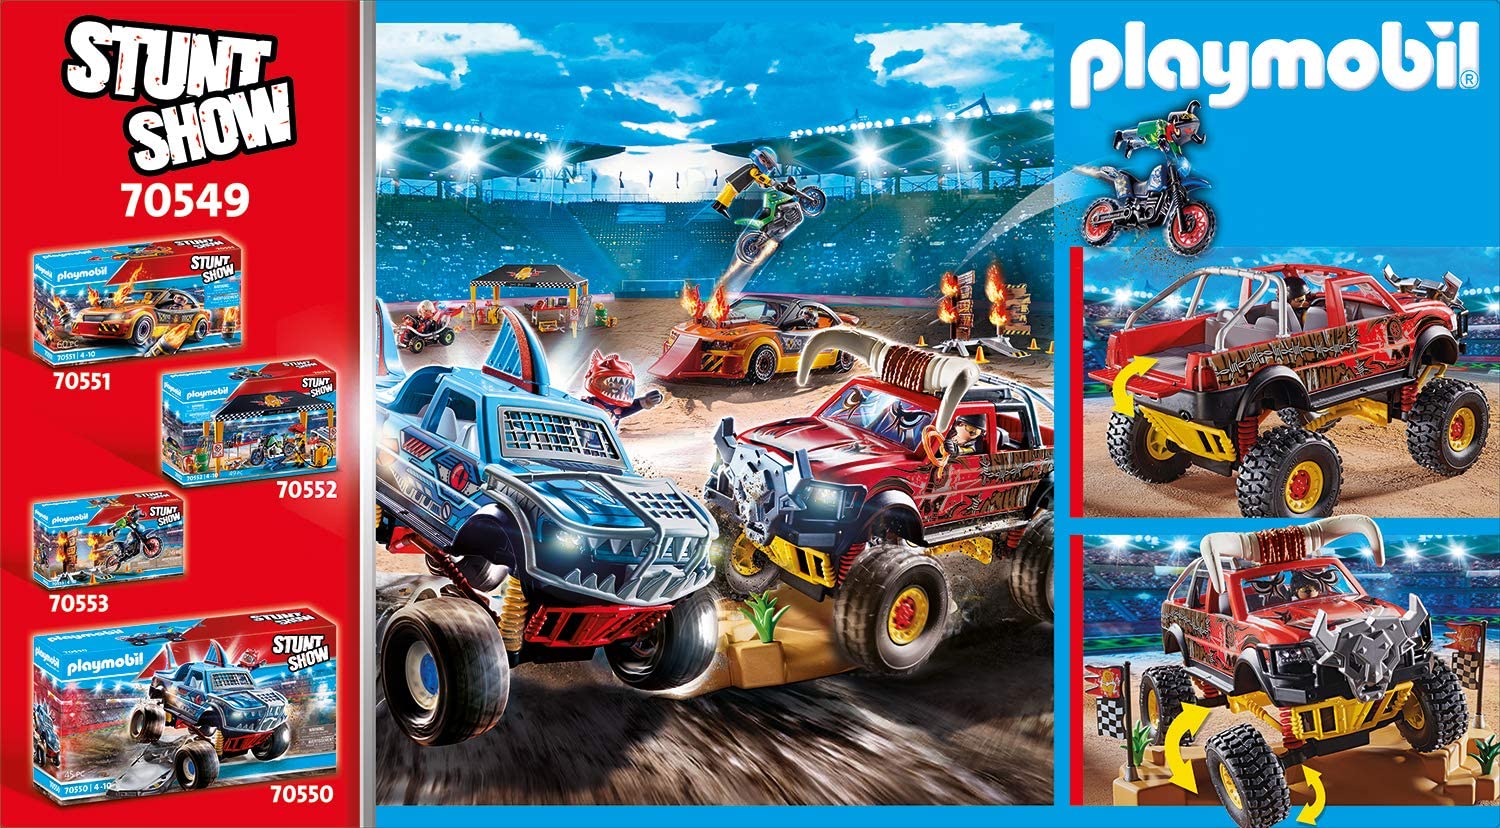 Playmobil Stunt Show Bull Monster Truck 70549 Discount Toy Co